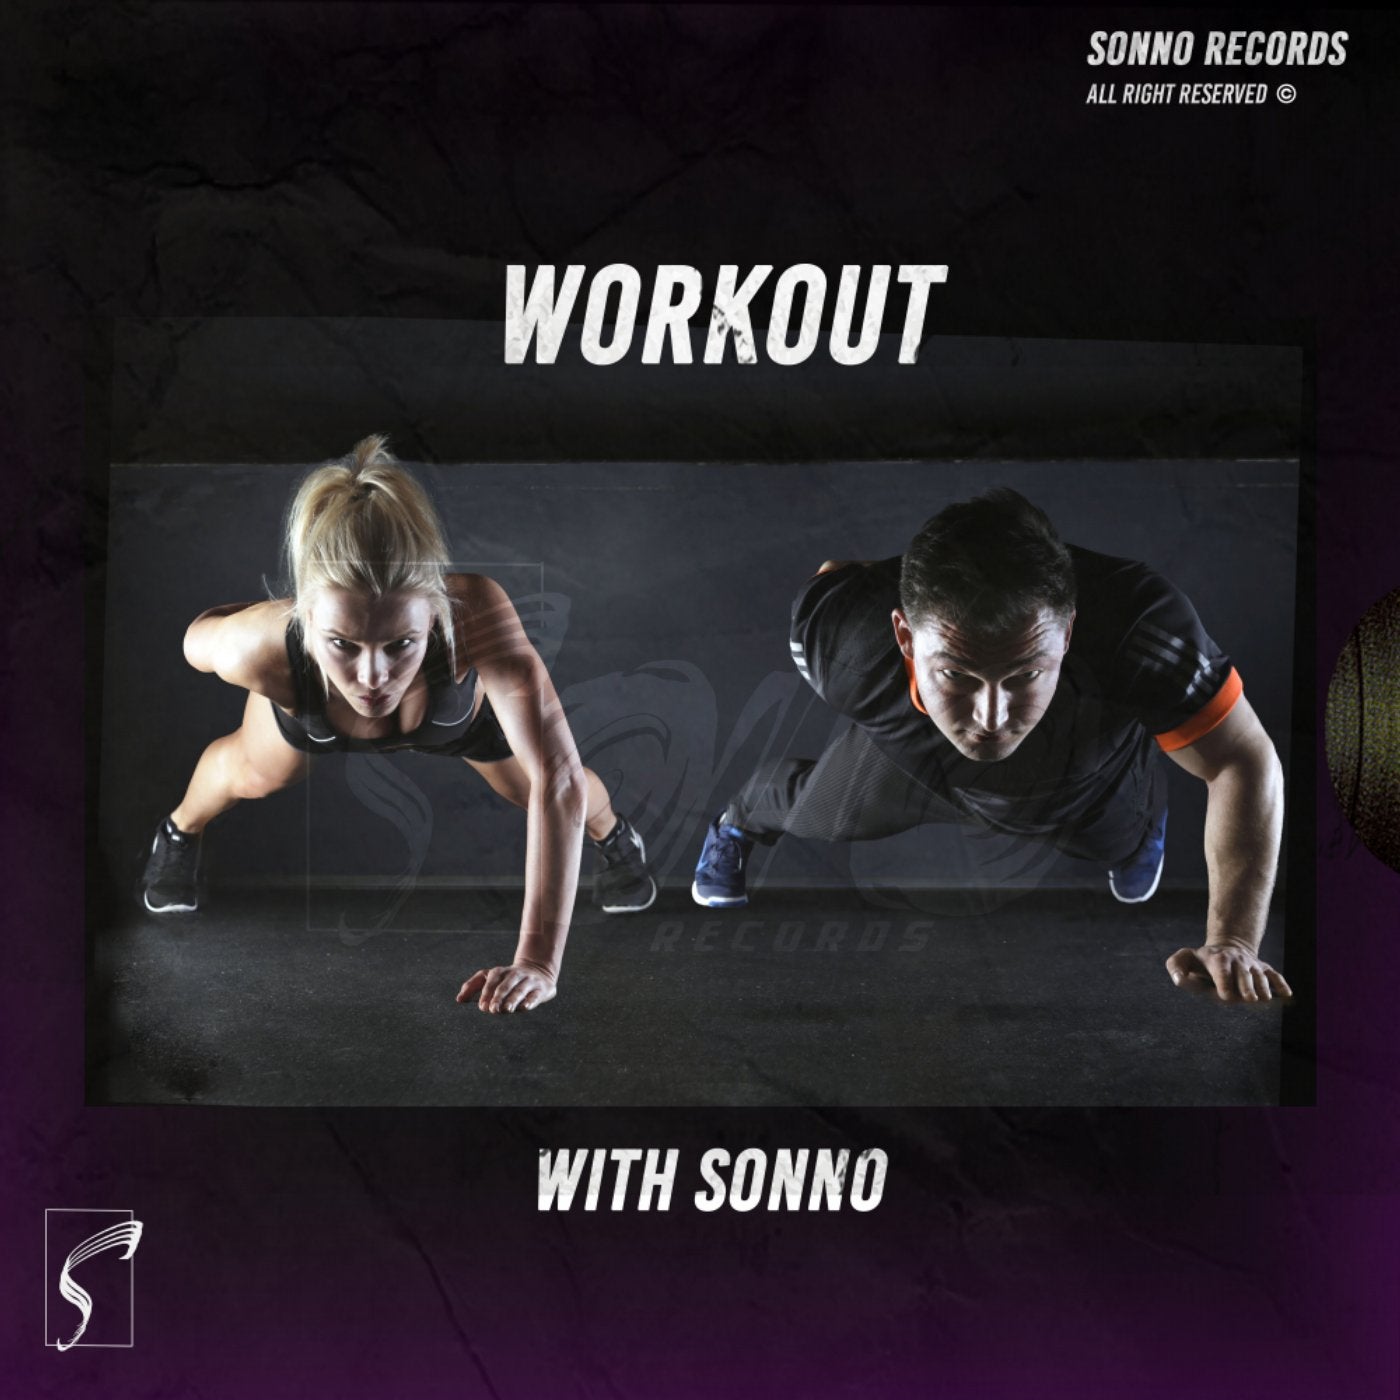 Workout with Sonno